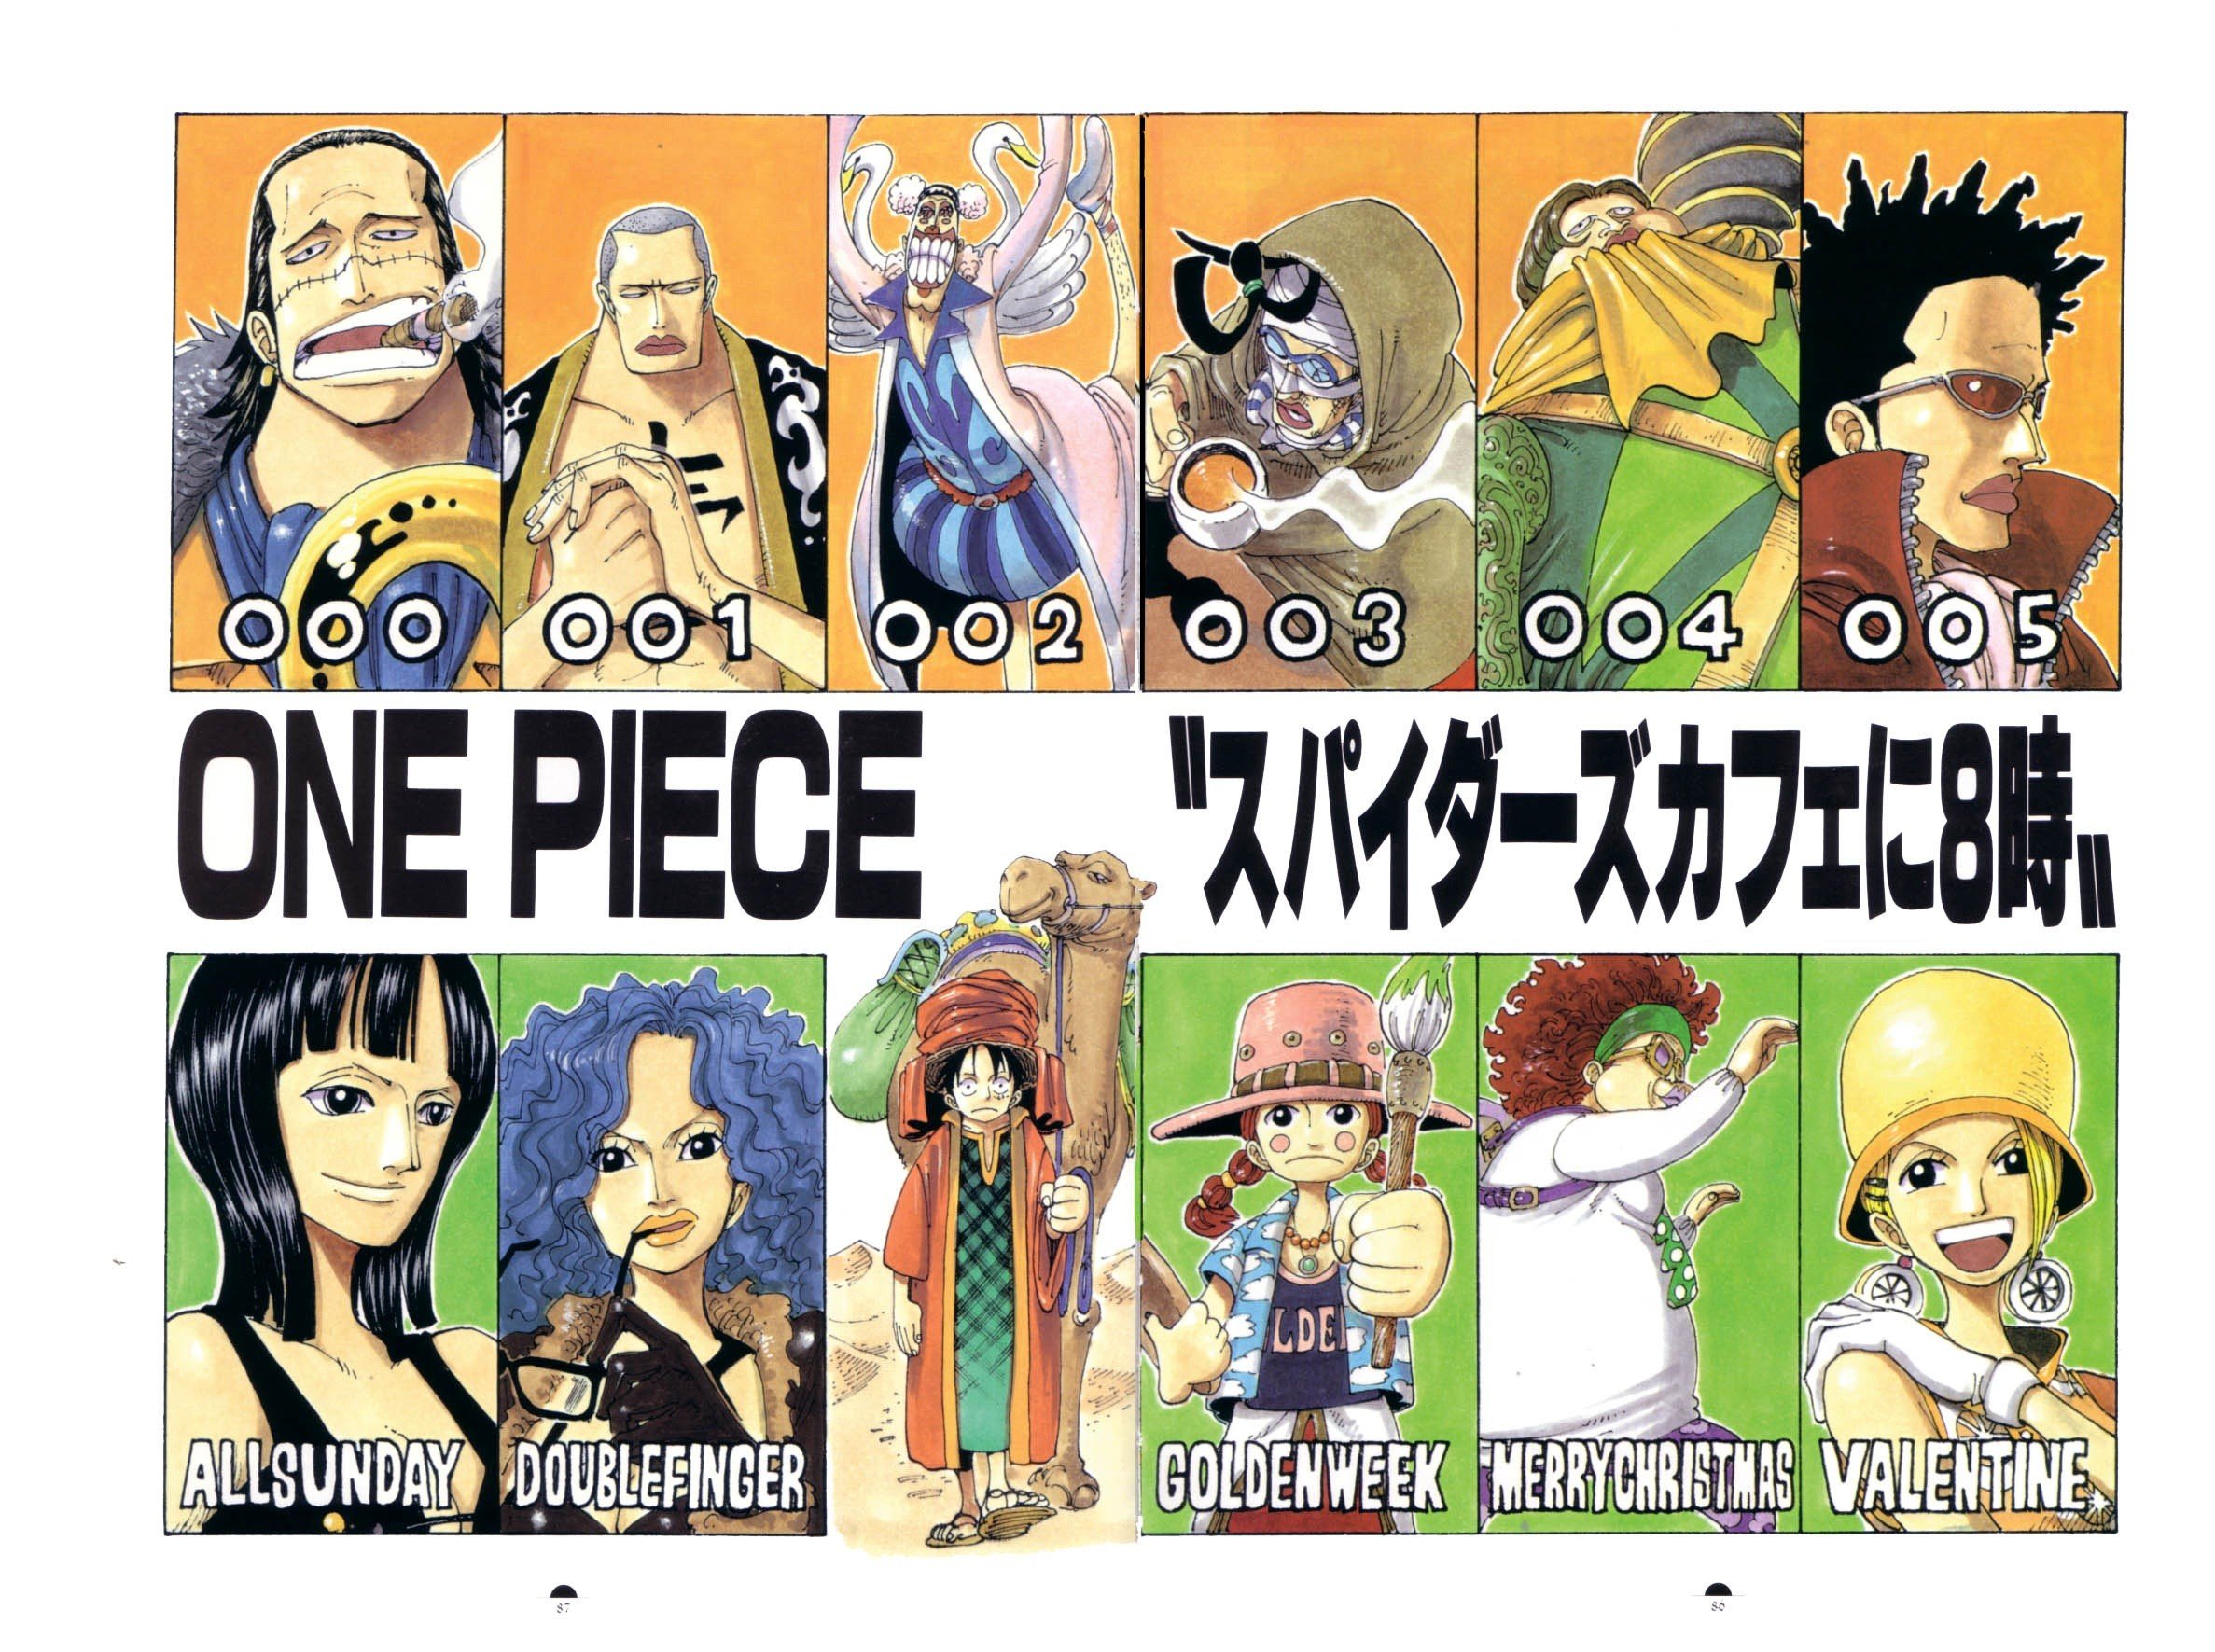 One Piece Nico Robin Monkey D Luffy Crocodile Character Hd Wallpapers Desktop And Mobile Images Photos